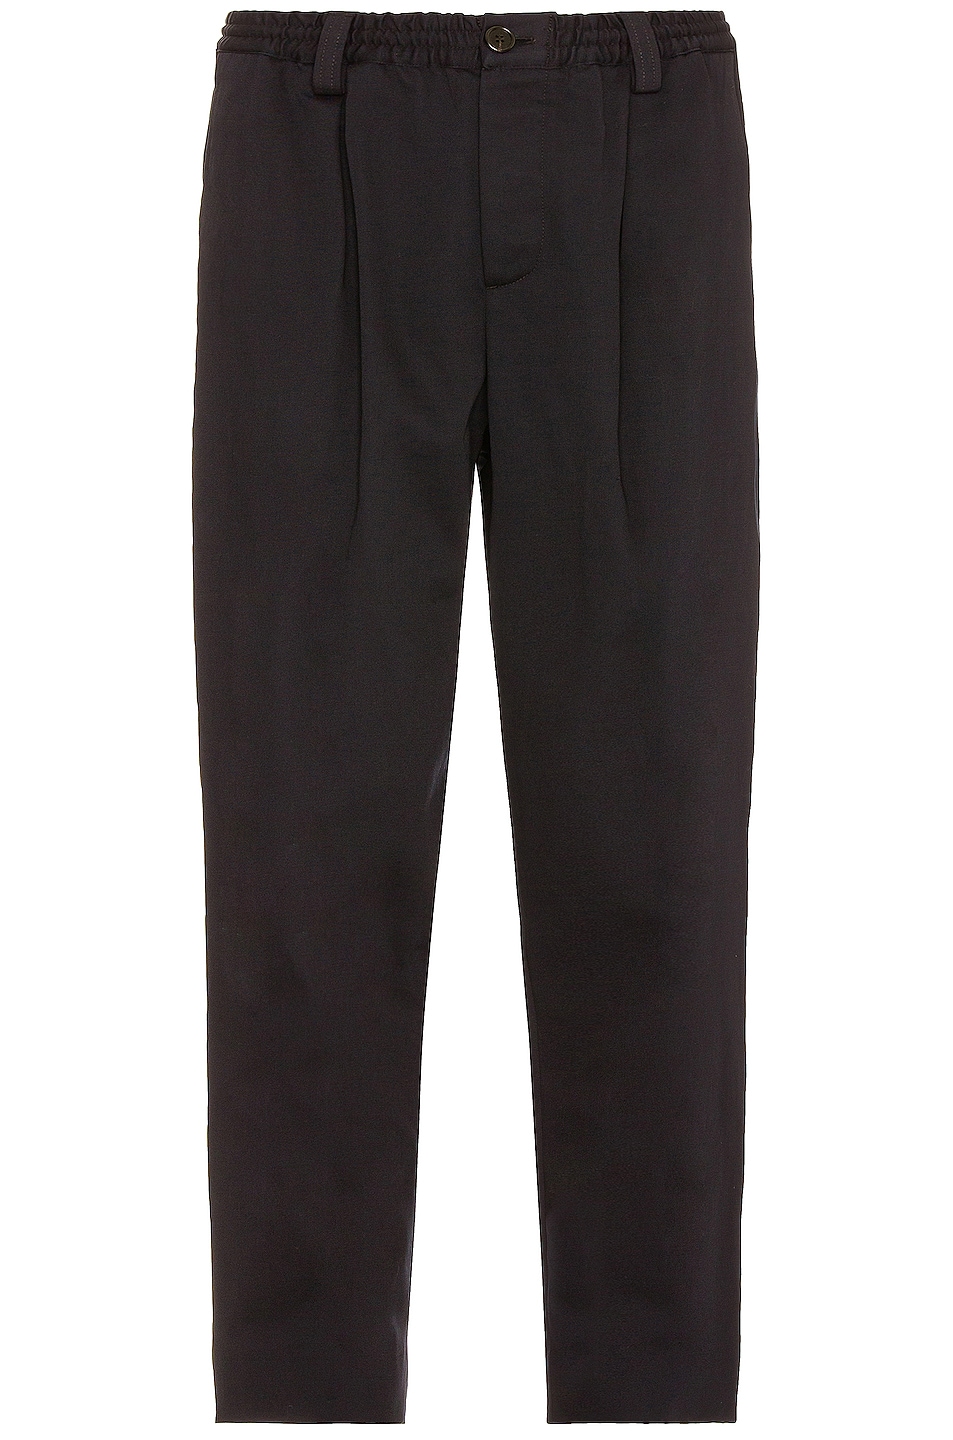 Image 1 of Marni Cropped Drawstring Trousers in Blue Black